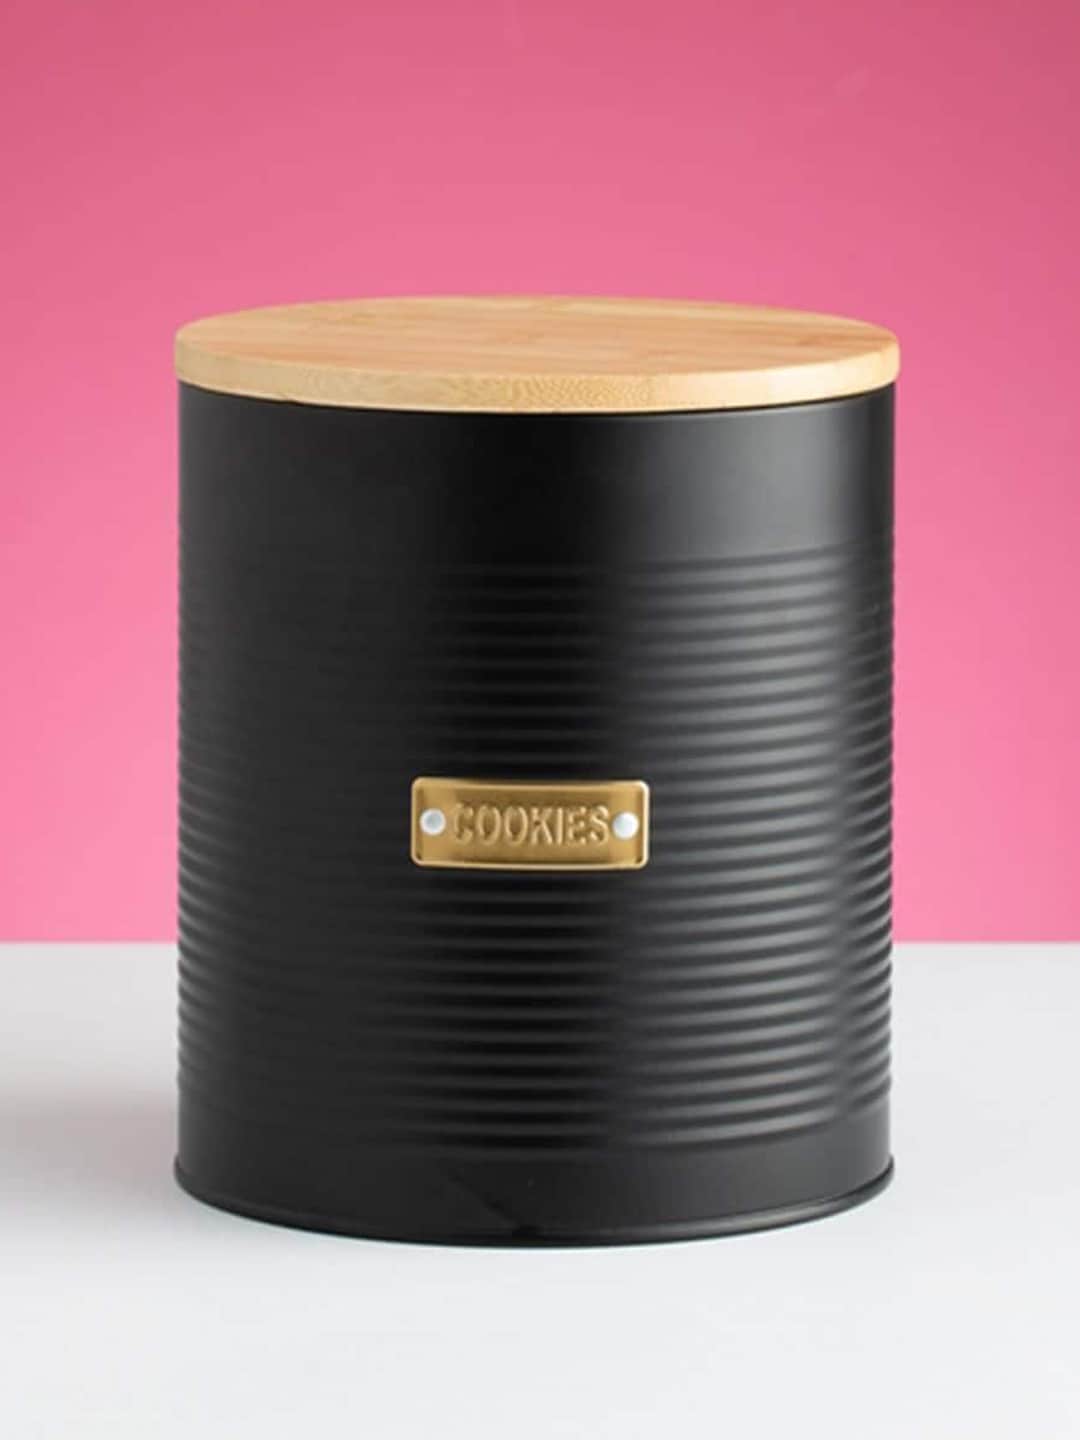 TYPHOON Black & Beige Striped Cookie Storage Container Price in India